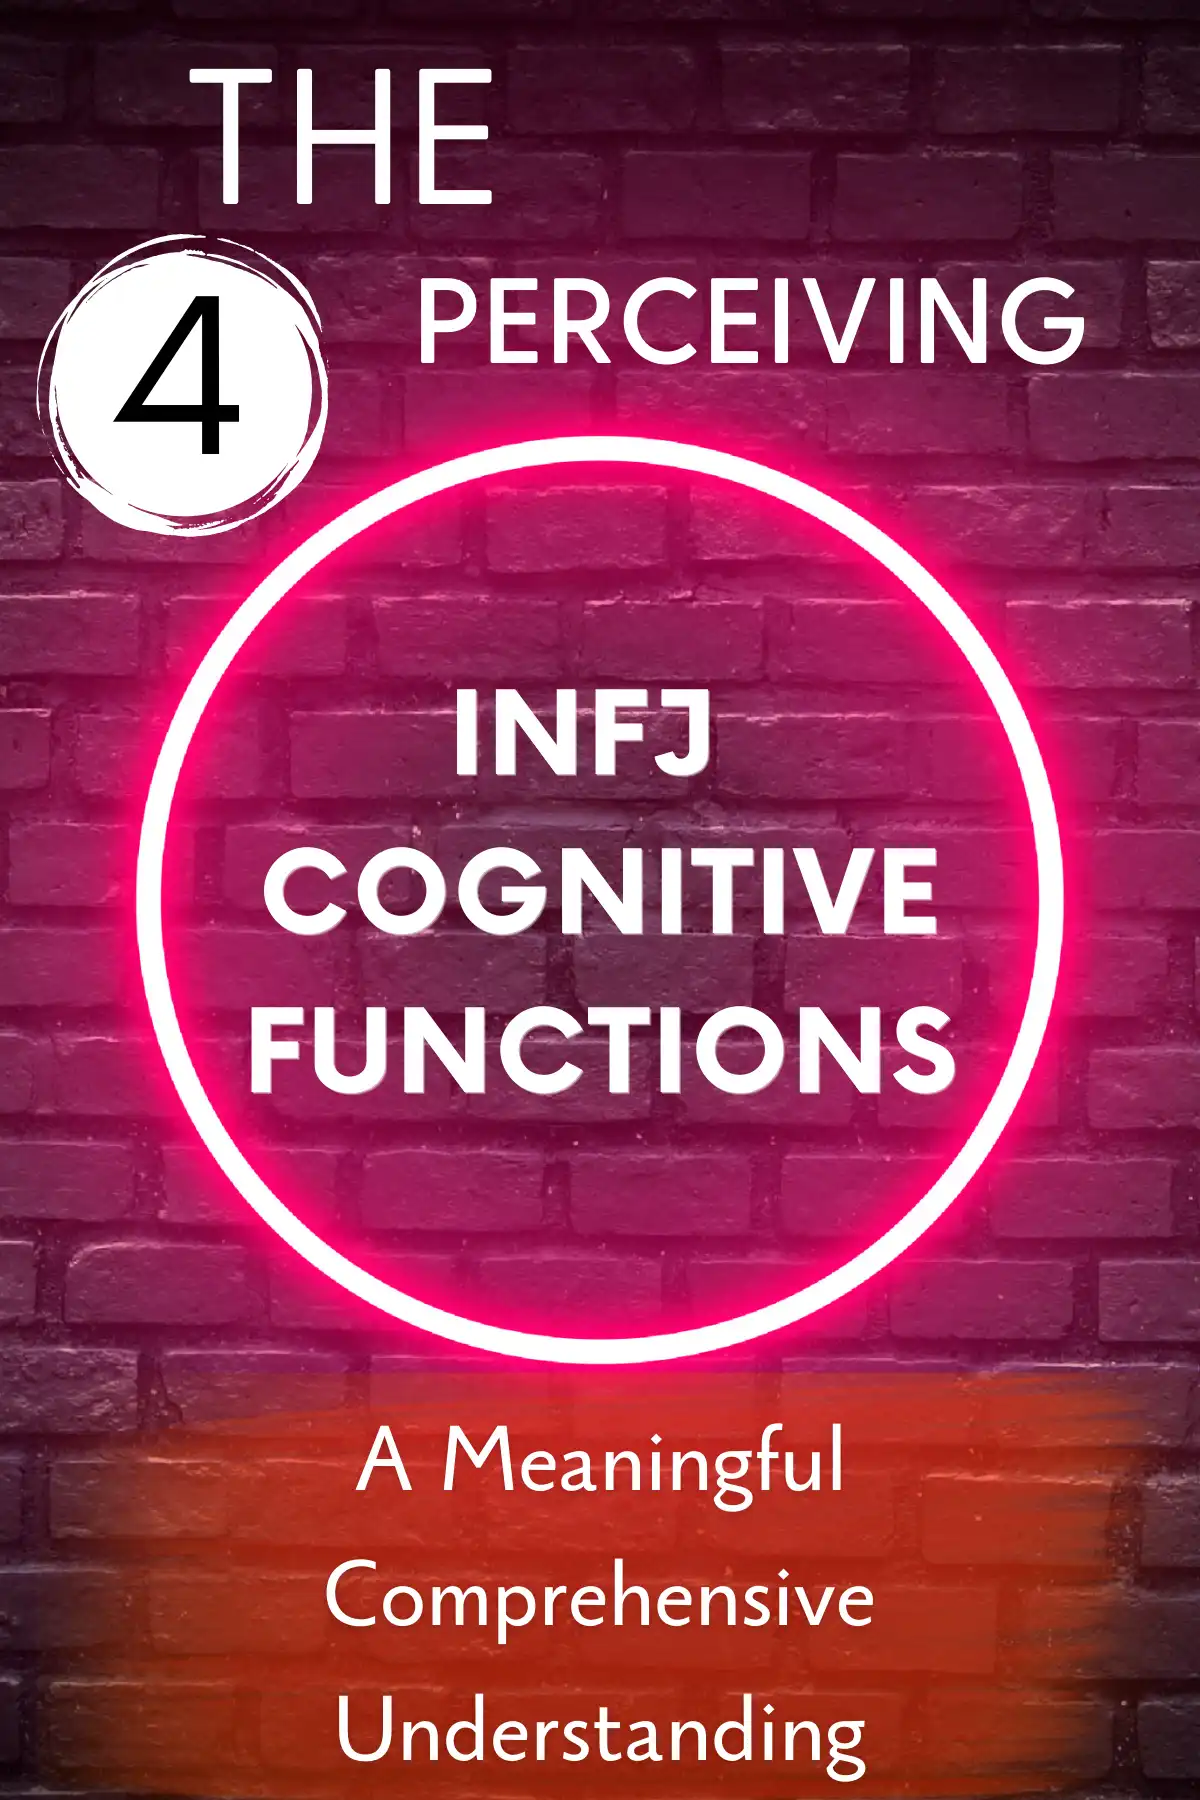 The 4 Perceiving INFJ Cognitive Functions: A Meaningful Comprehensive Understanding